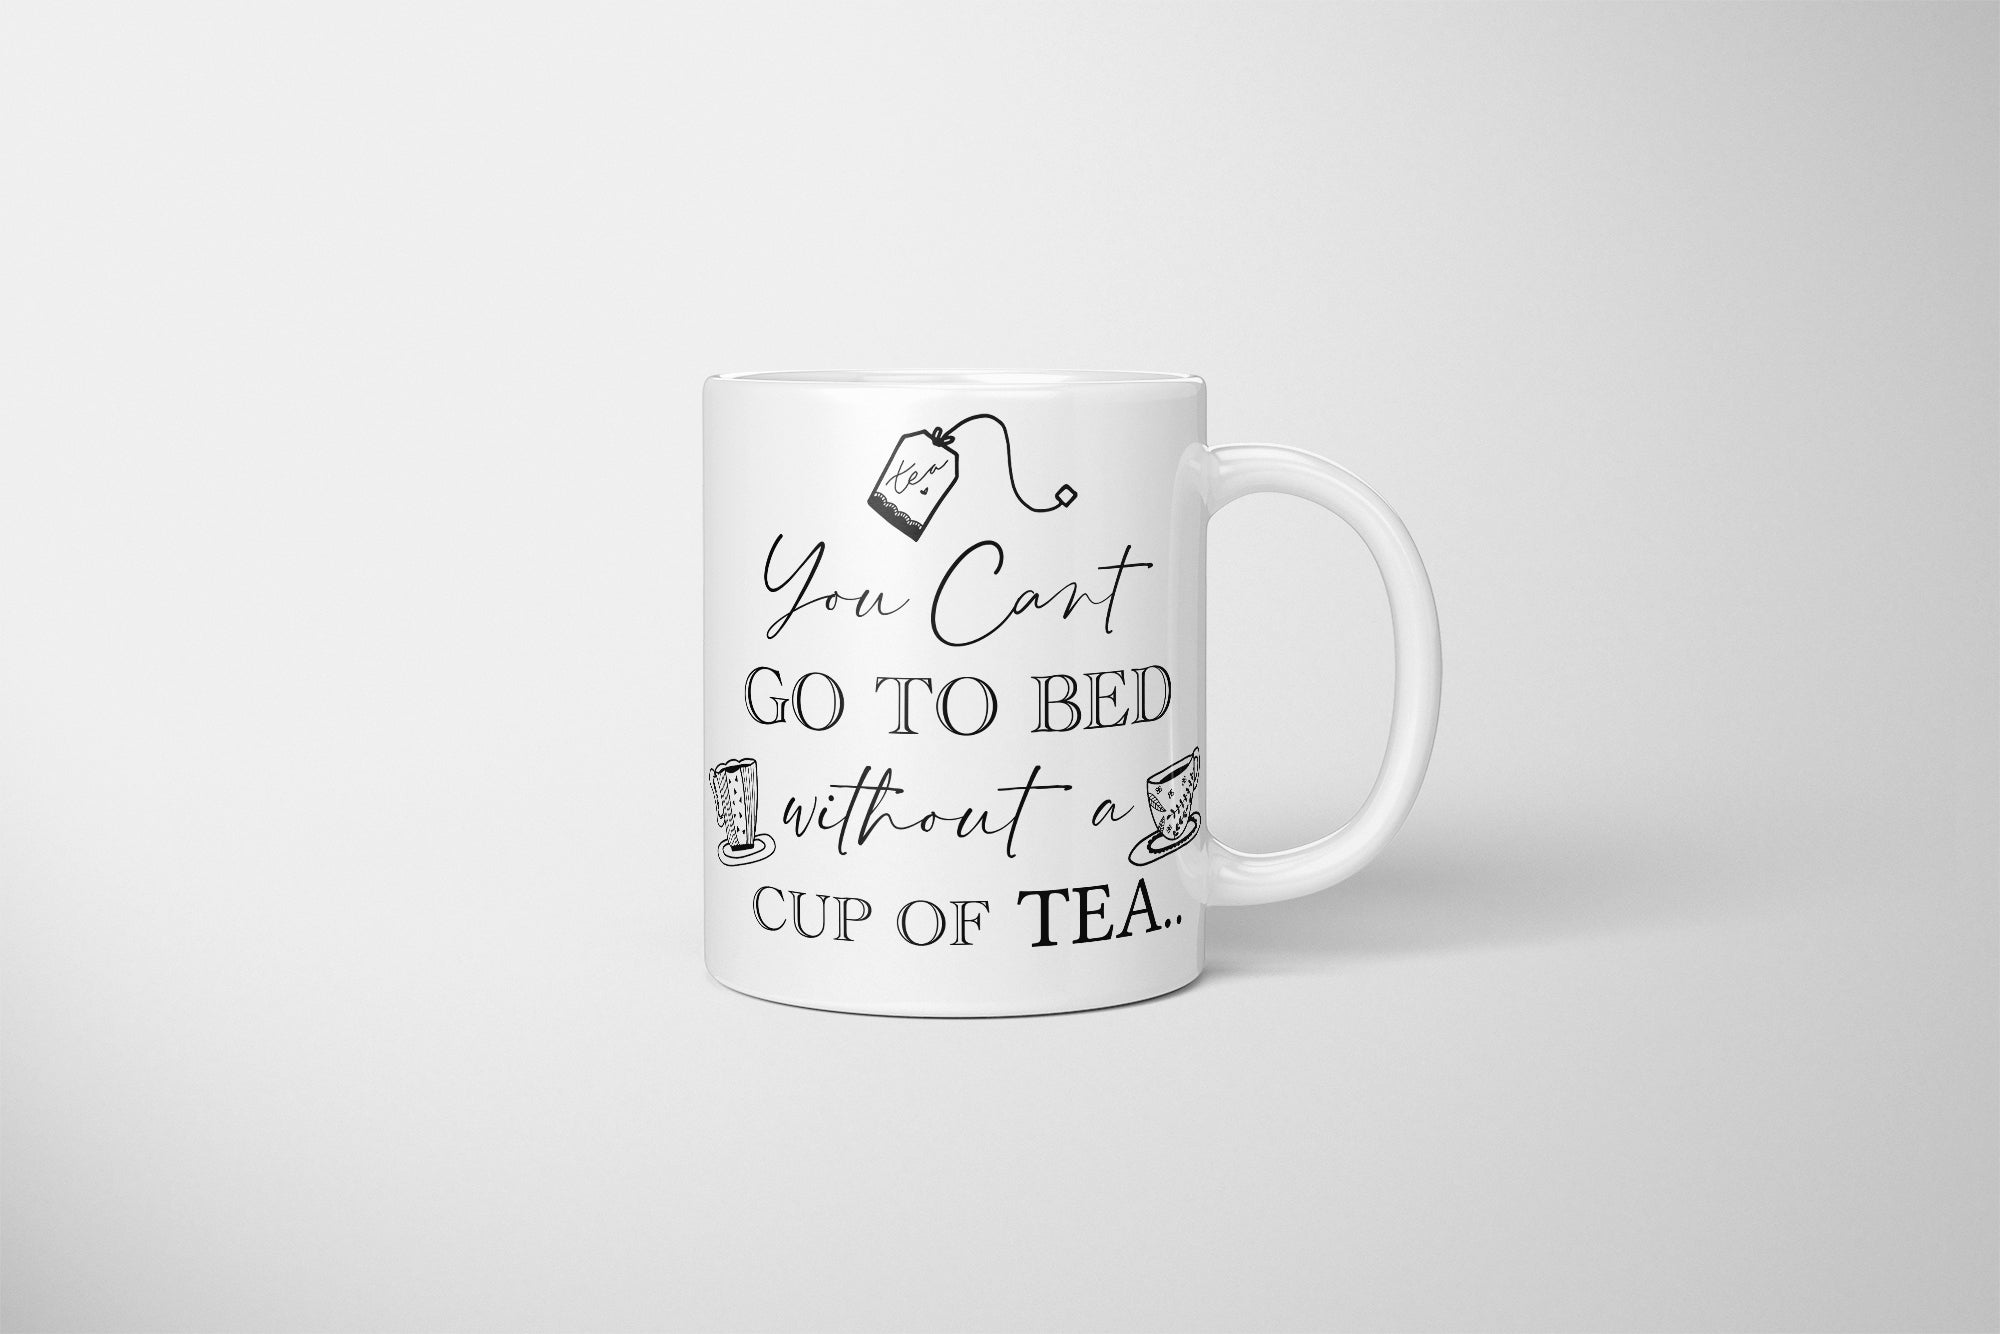 You Cant Go To Bed Without A Cup Of Tea Mug, One Direction Mug, One Direction Little Things Mug, Little Things Mug, One Direction Fan Gift, Little Things, Little Things Fan Present, Little Things Tea Mug